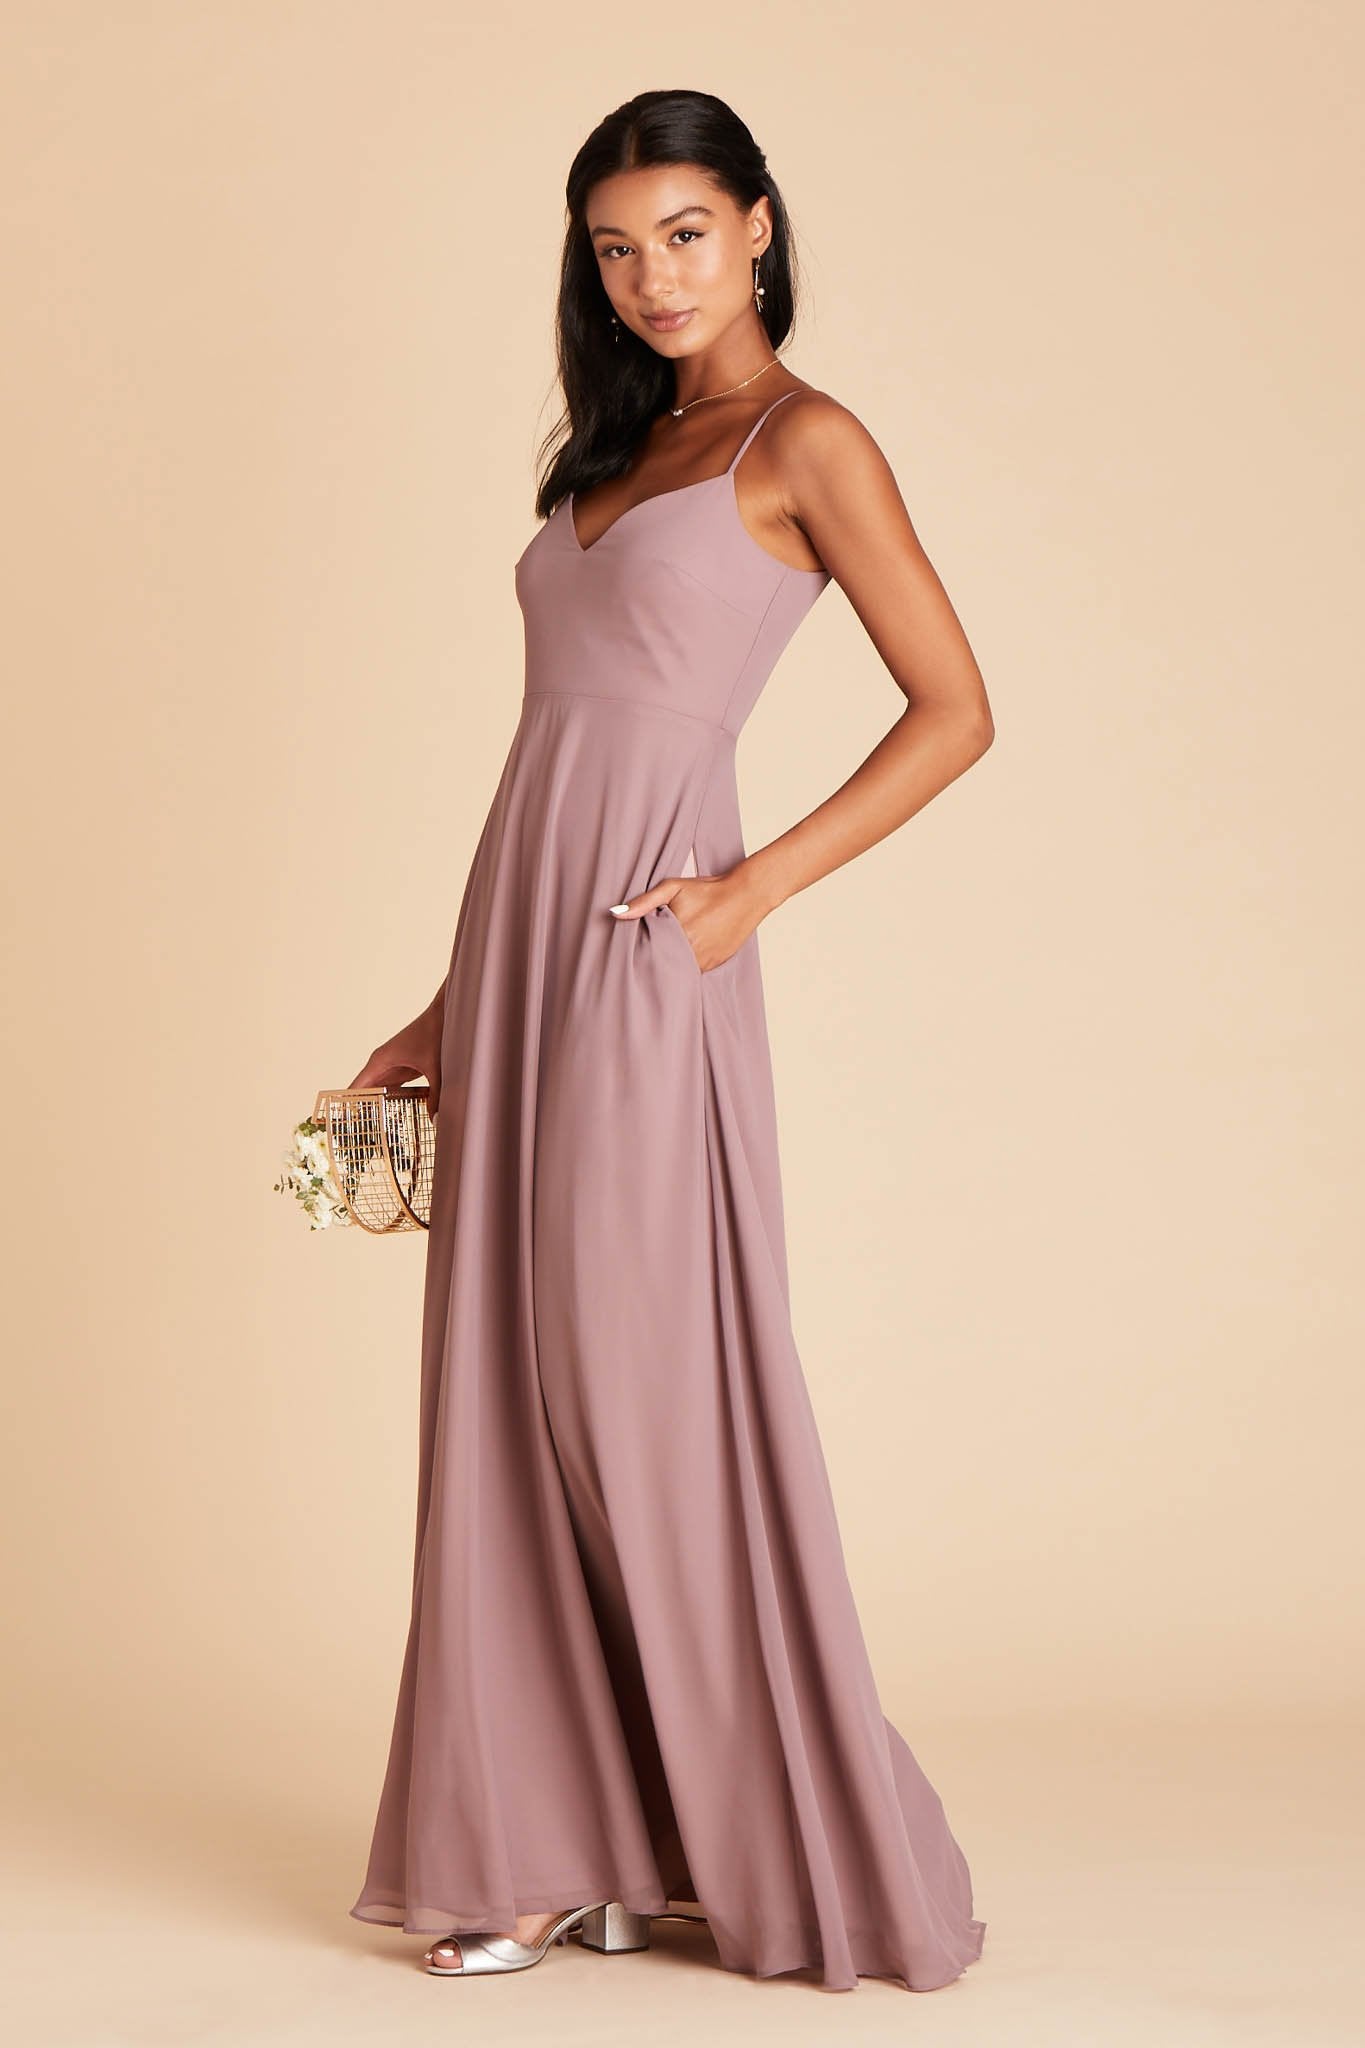 Devin convertible bridesmaid dress in dark mauve chiffon by Birdy Grey, side view with hand in pocket